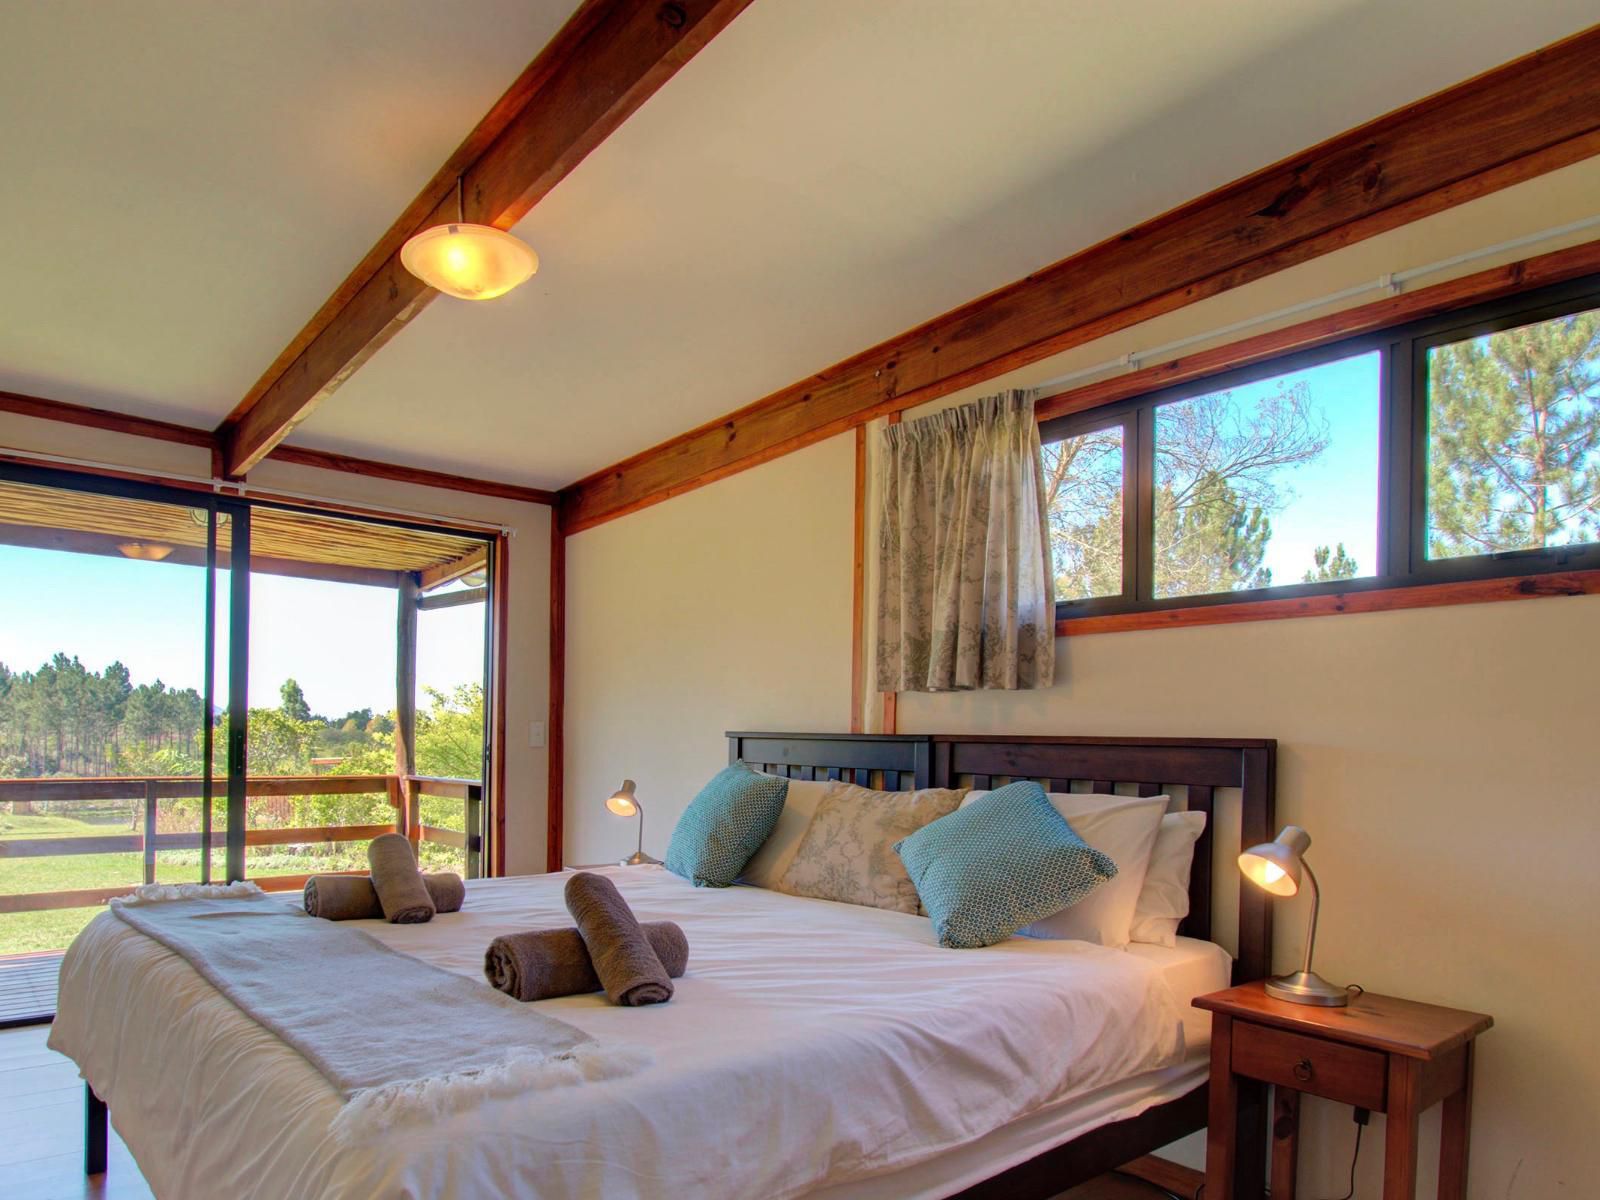 Amara Farm Cottages The Crags Western Cape South Africa Bedroom